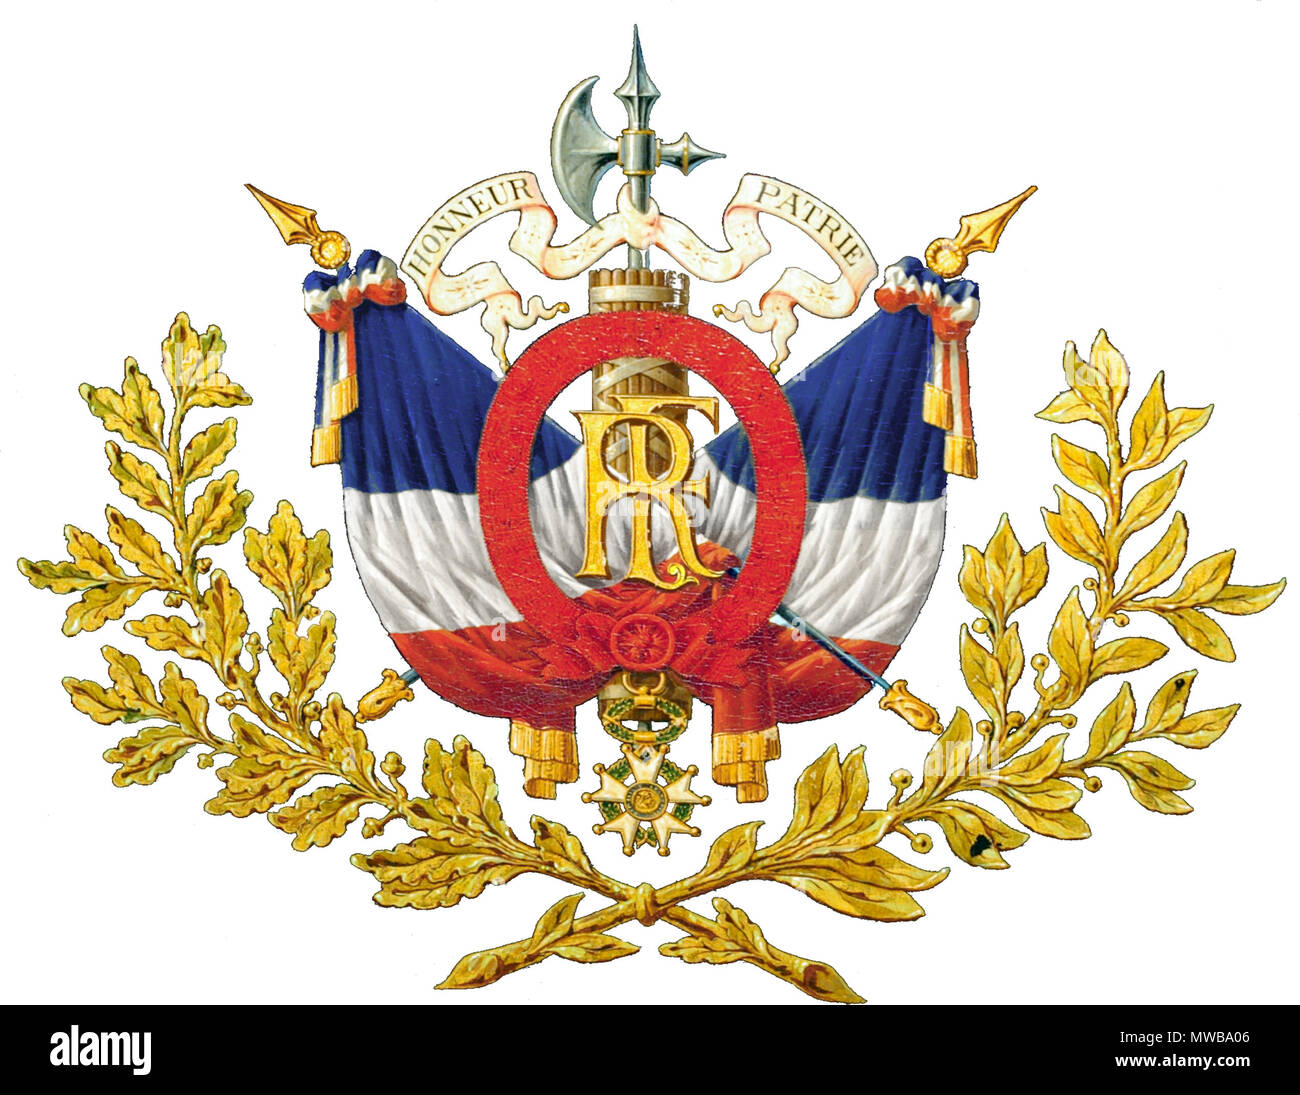 English: 'Arms' for the French Republic, as shown in the Larousse  Encyclopédie (1898 ed.). (This artistic creation is not an official  national symbol of France). Français : Prétendues armoiries de la